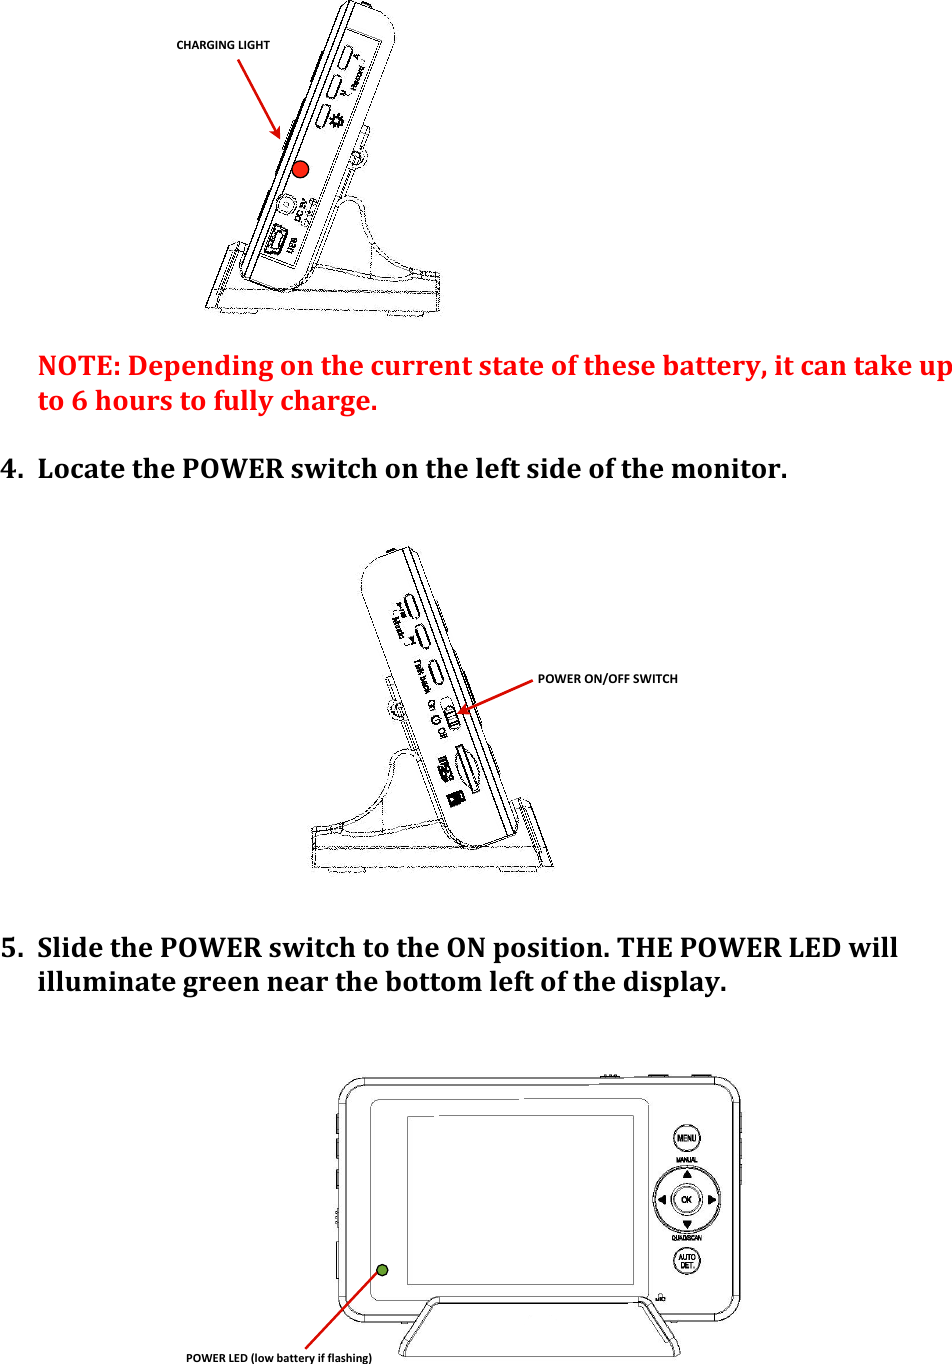 CHARGING(LIGHTPOWER&amp;ON/OFF&amp;SWITCHPOWER&amp;LED&amp;(low&amp;battery&amp;if&amp;flashing)&apos;&apos;&apos;&apos;&apos;&apos;&apos;&apos;&apos;NOTE:&apos;Depending&apos;on&apos;the&apos;current&apos;state&apos;of&apos;these&apos;battery,&apos;it&apos;can&apos;take&apos;up&apos;to&apos;6&apos;hours&apos;to&apos;fully&apos;charge.&apos;&apos;&apos;4. Locate&apos;the&apos;POWER&apos;switch&apos;on&apos;the&apos;left&apos;side&apos;of&apos;the&apos;monitor.&apos;&apos;&apos;&apos;&apos;&apos;&apos;&apos;&apos;&apos;&apos;&apos;&apos;&apos;5. Slide&apos;the&apos;POWER&apos;switch&apos;to&apos;the&apos;ON&apos;position.&apos;THE&apos;POWER&apos;LED&apos;will&apos;illuminate&apos;green&apos;near&apos;the&apos;bottom&apos;left&apos;of&apos;the&apos;display.&apos;&apos;&apos;&apos;&apos;&apos;&apos;&apos;&apos;&apos;&apos;&apos;&apos;